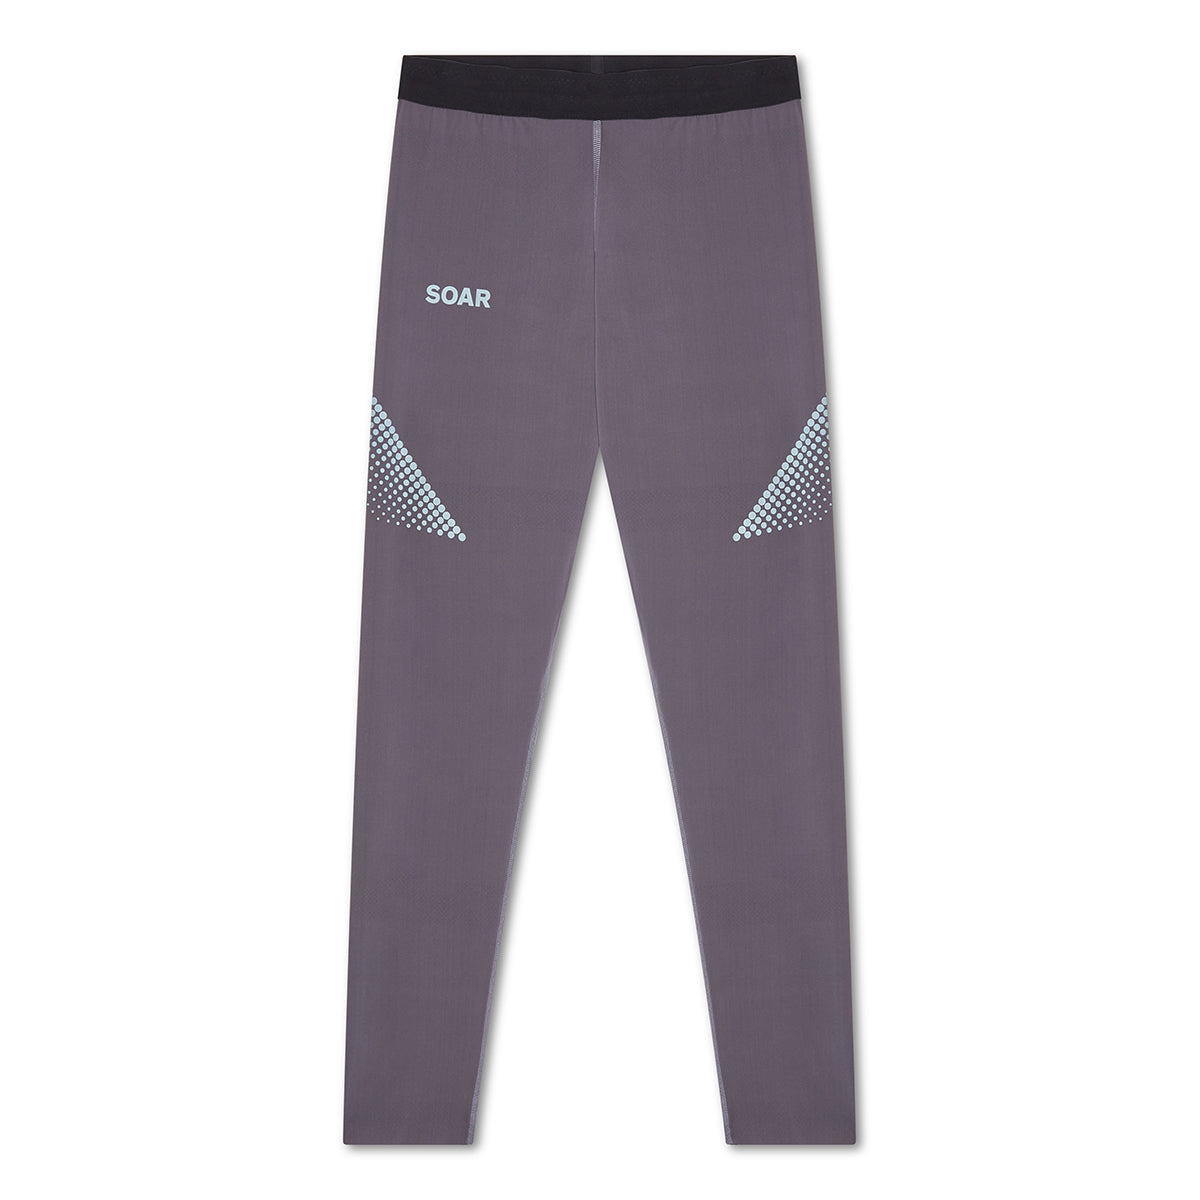 Session running tights